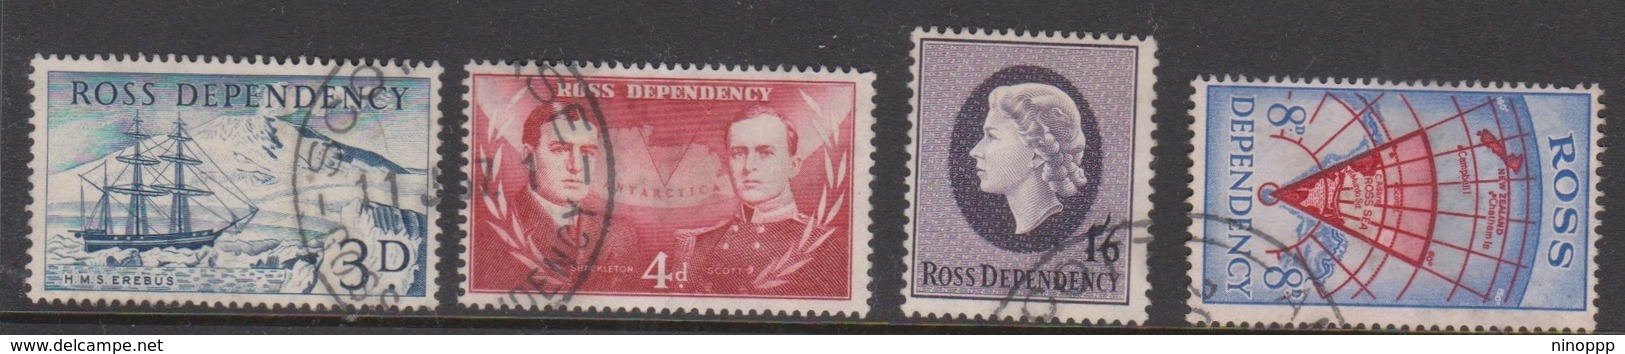 New Zealand-Ross Dependency  SG 1-4  1957 Definitives, Used - Gebraucht